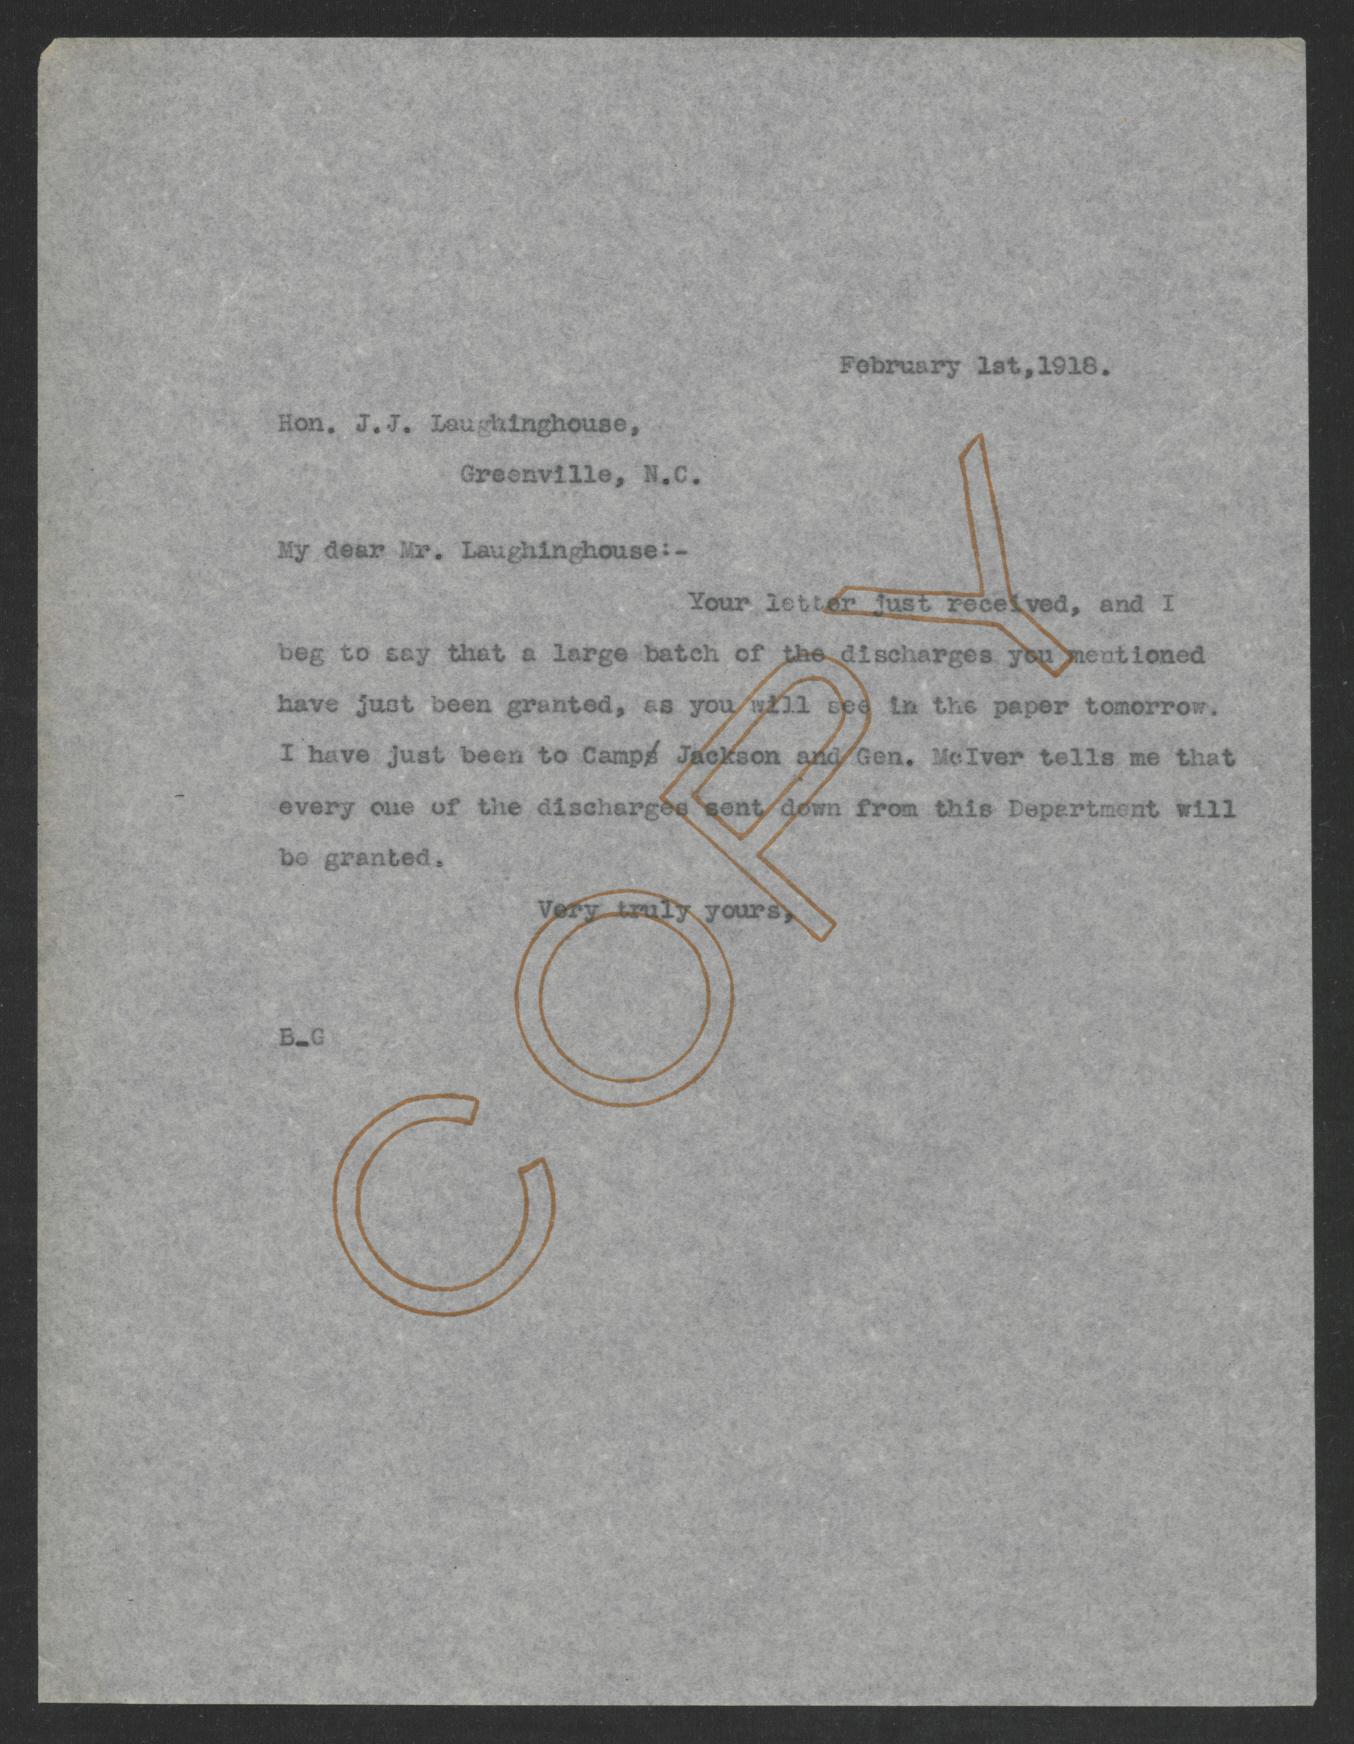 Letter from Thomas W. Bickett to Joseph J. Laughinghouse, February 1, 1918